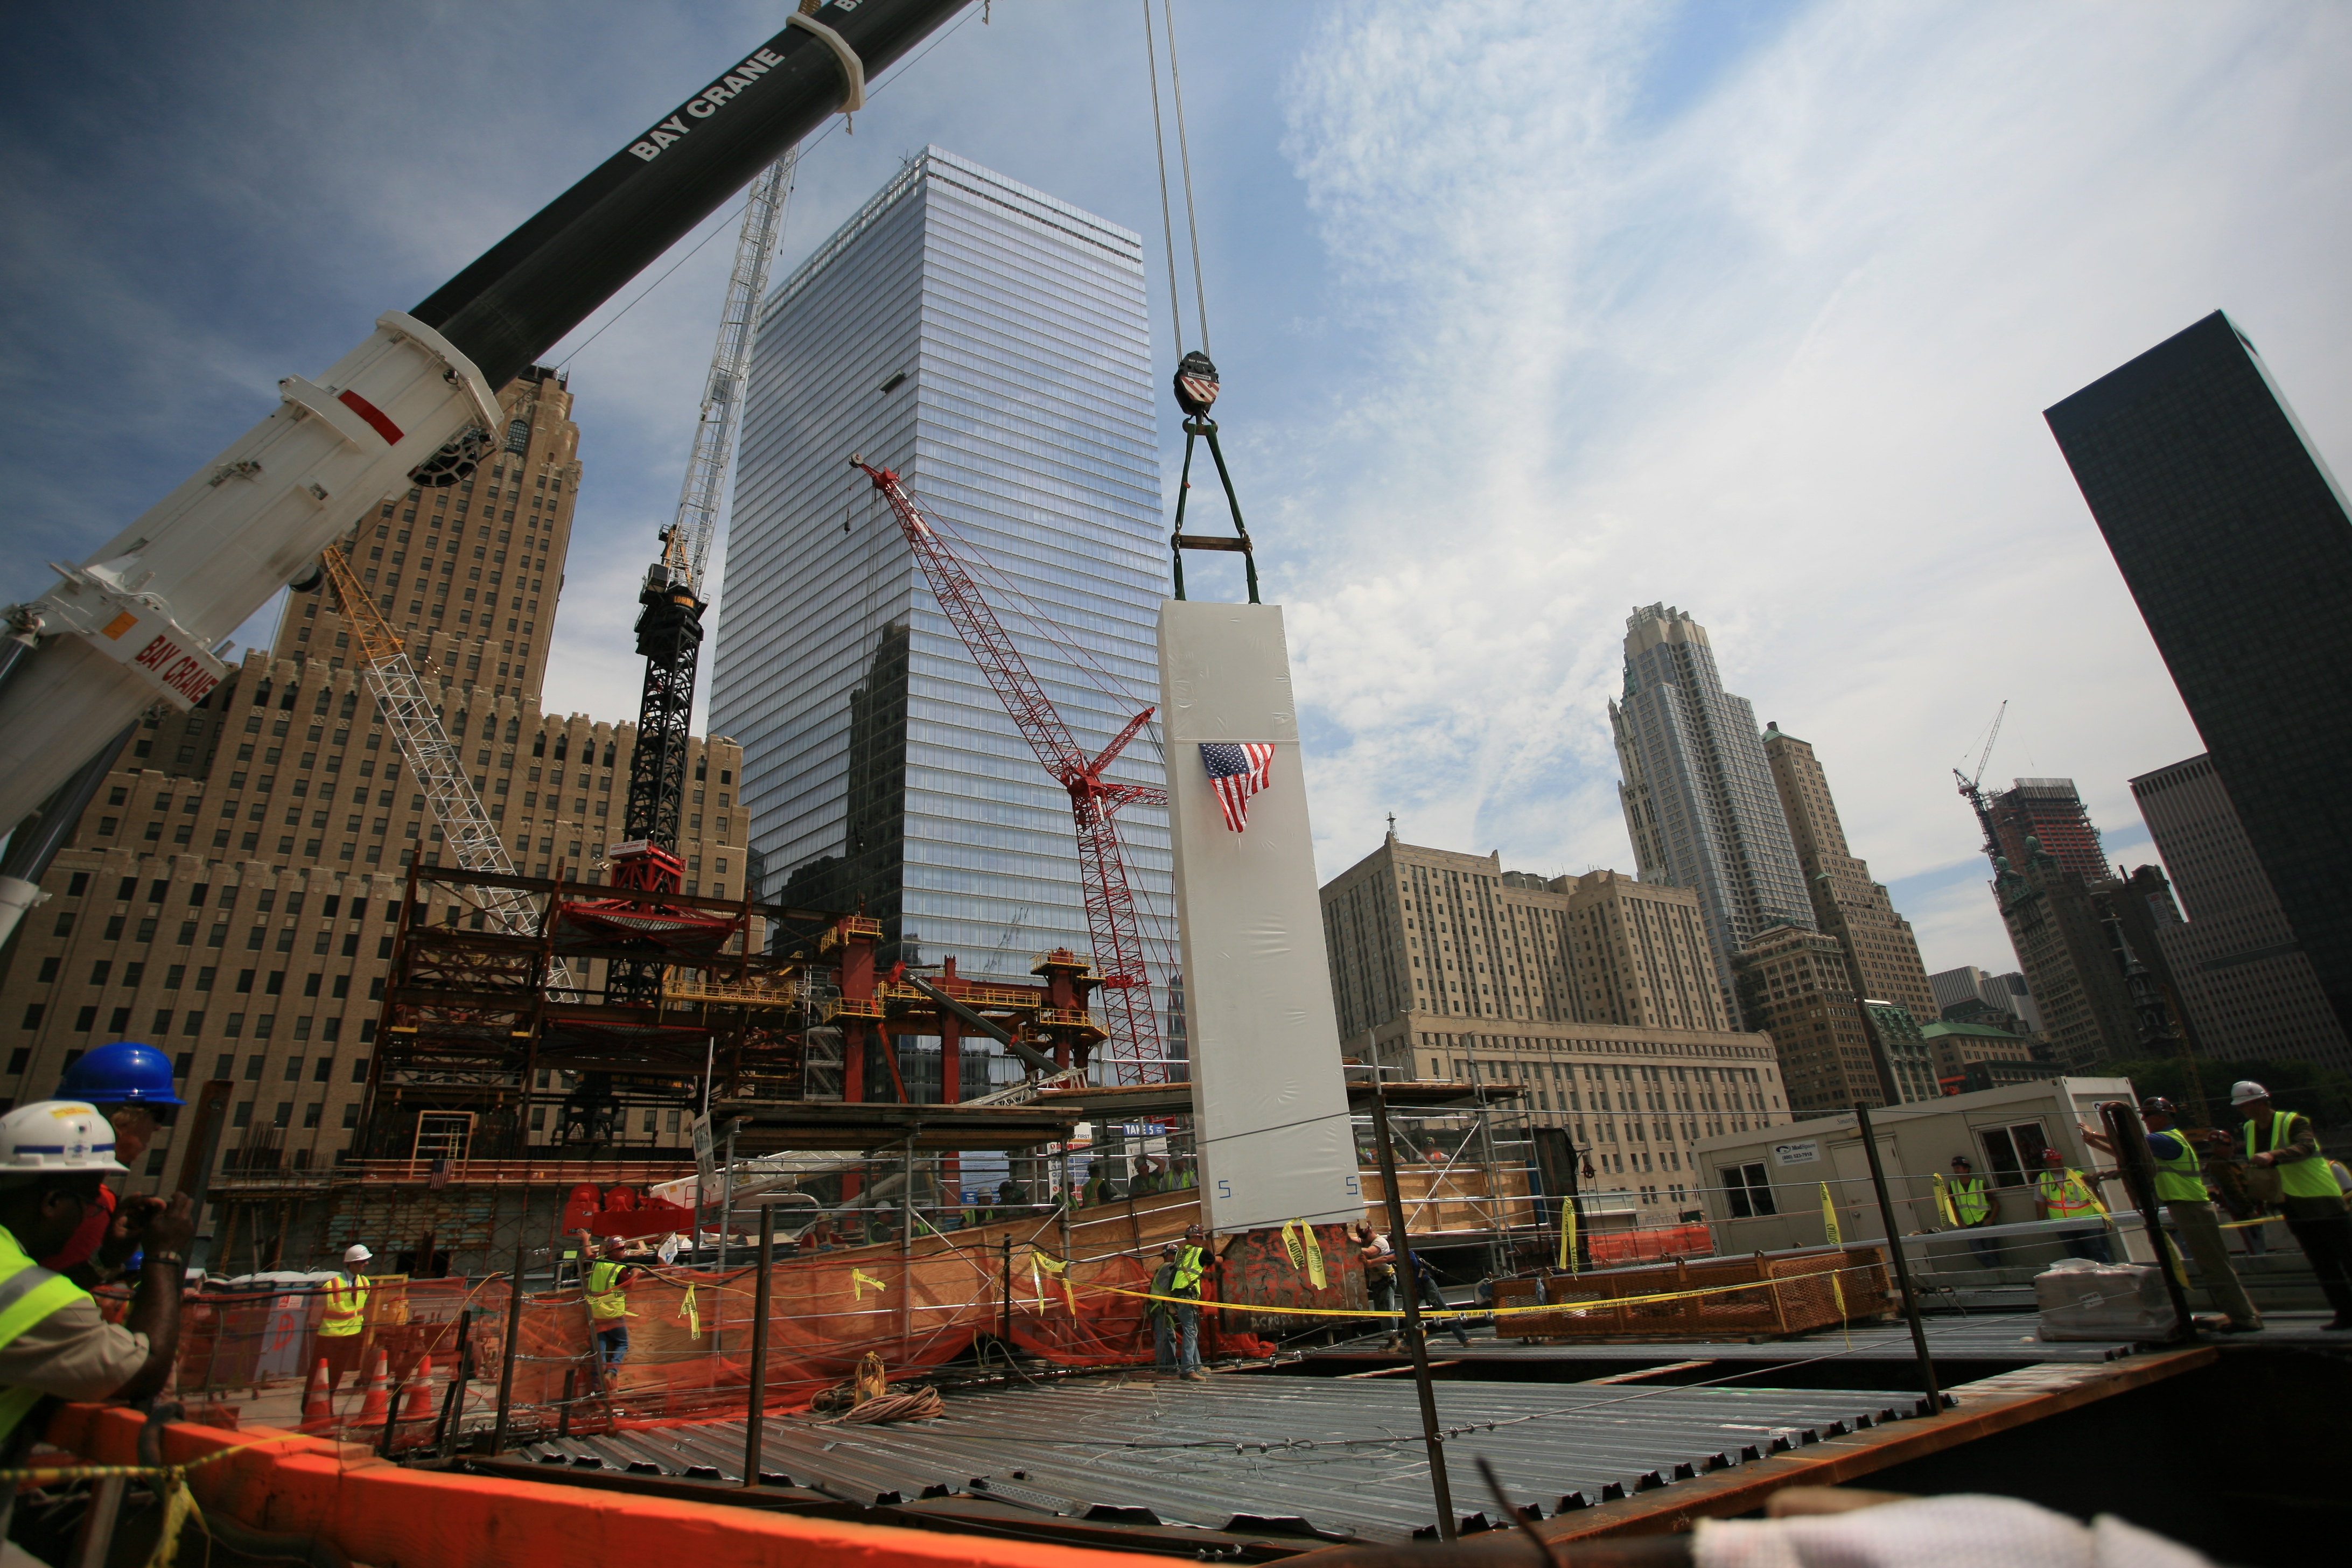 The Last Column is lowered into the 9/11 Memorial Museum by a crane on August 24, 2006.